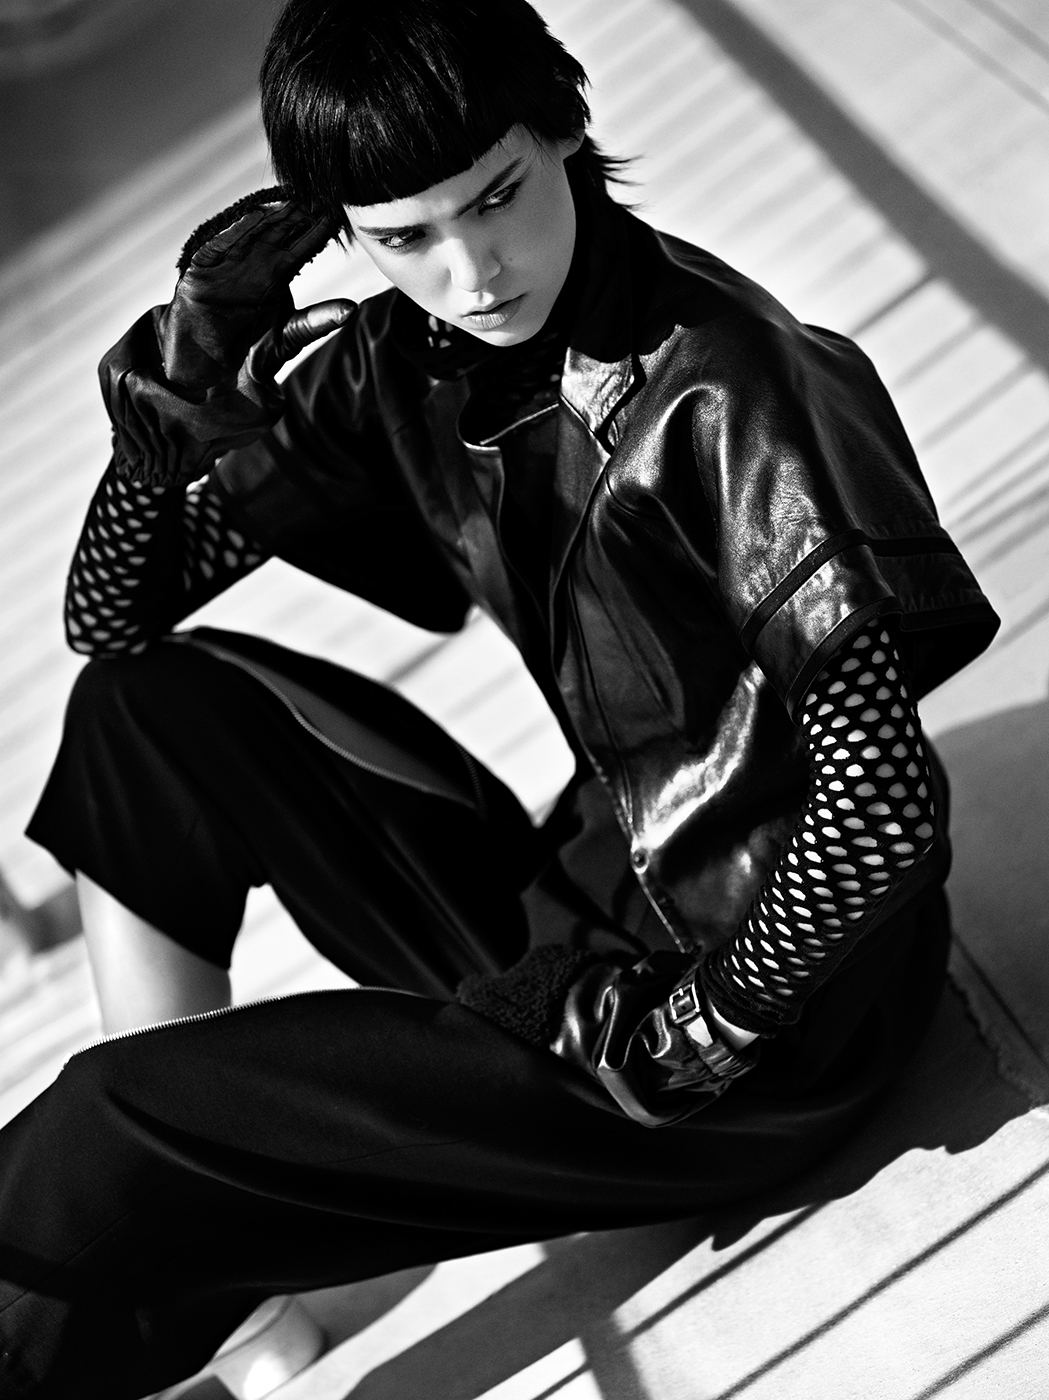 fashion image by patrik sehlstedt for intermission magazine